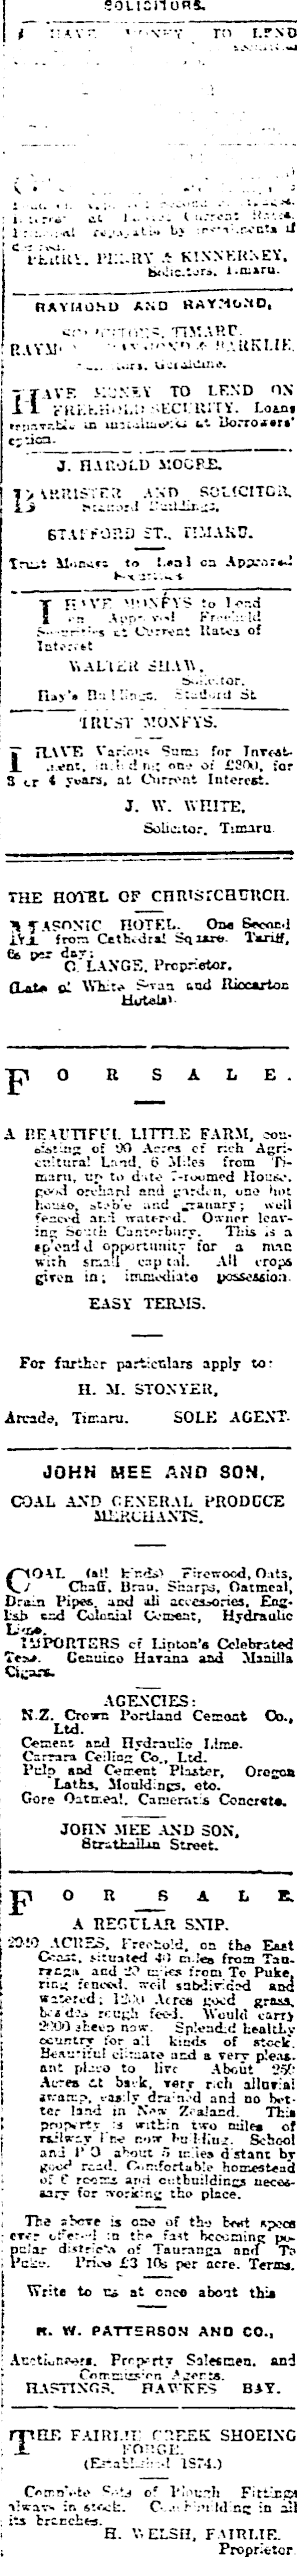 Papers Past Newspapers Timaru Herald 13 December 1911 Page 3 Advertisements Column 2